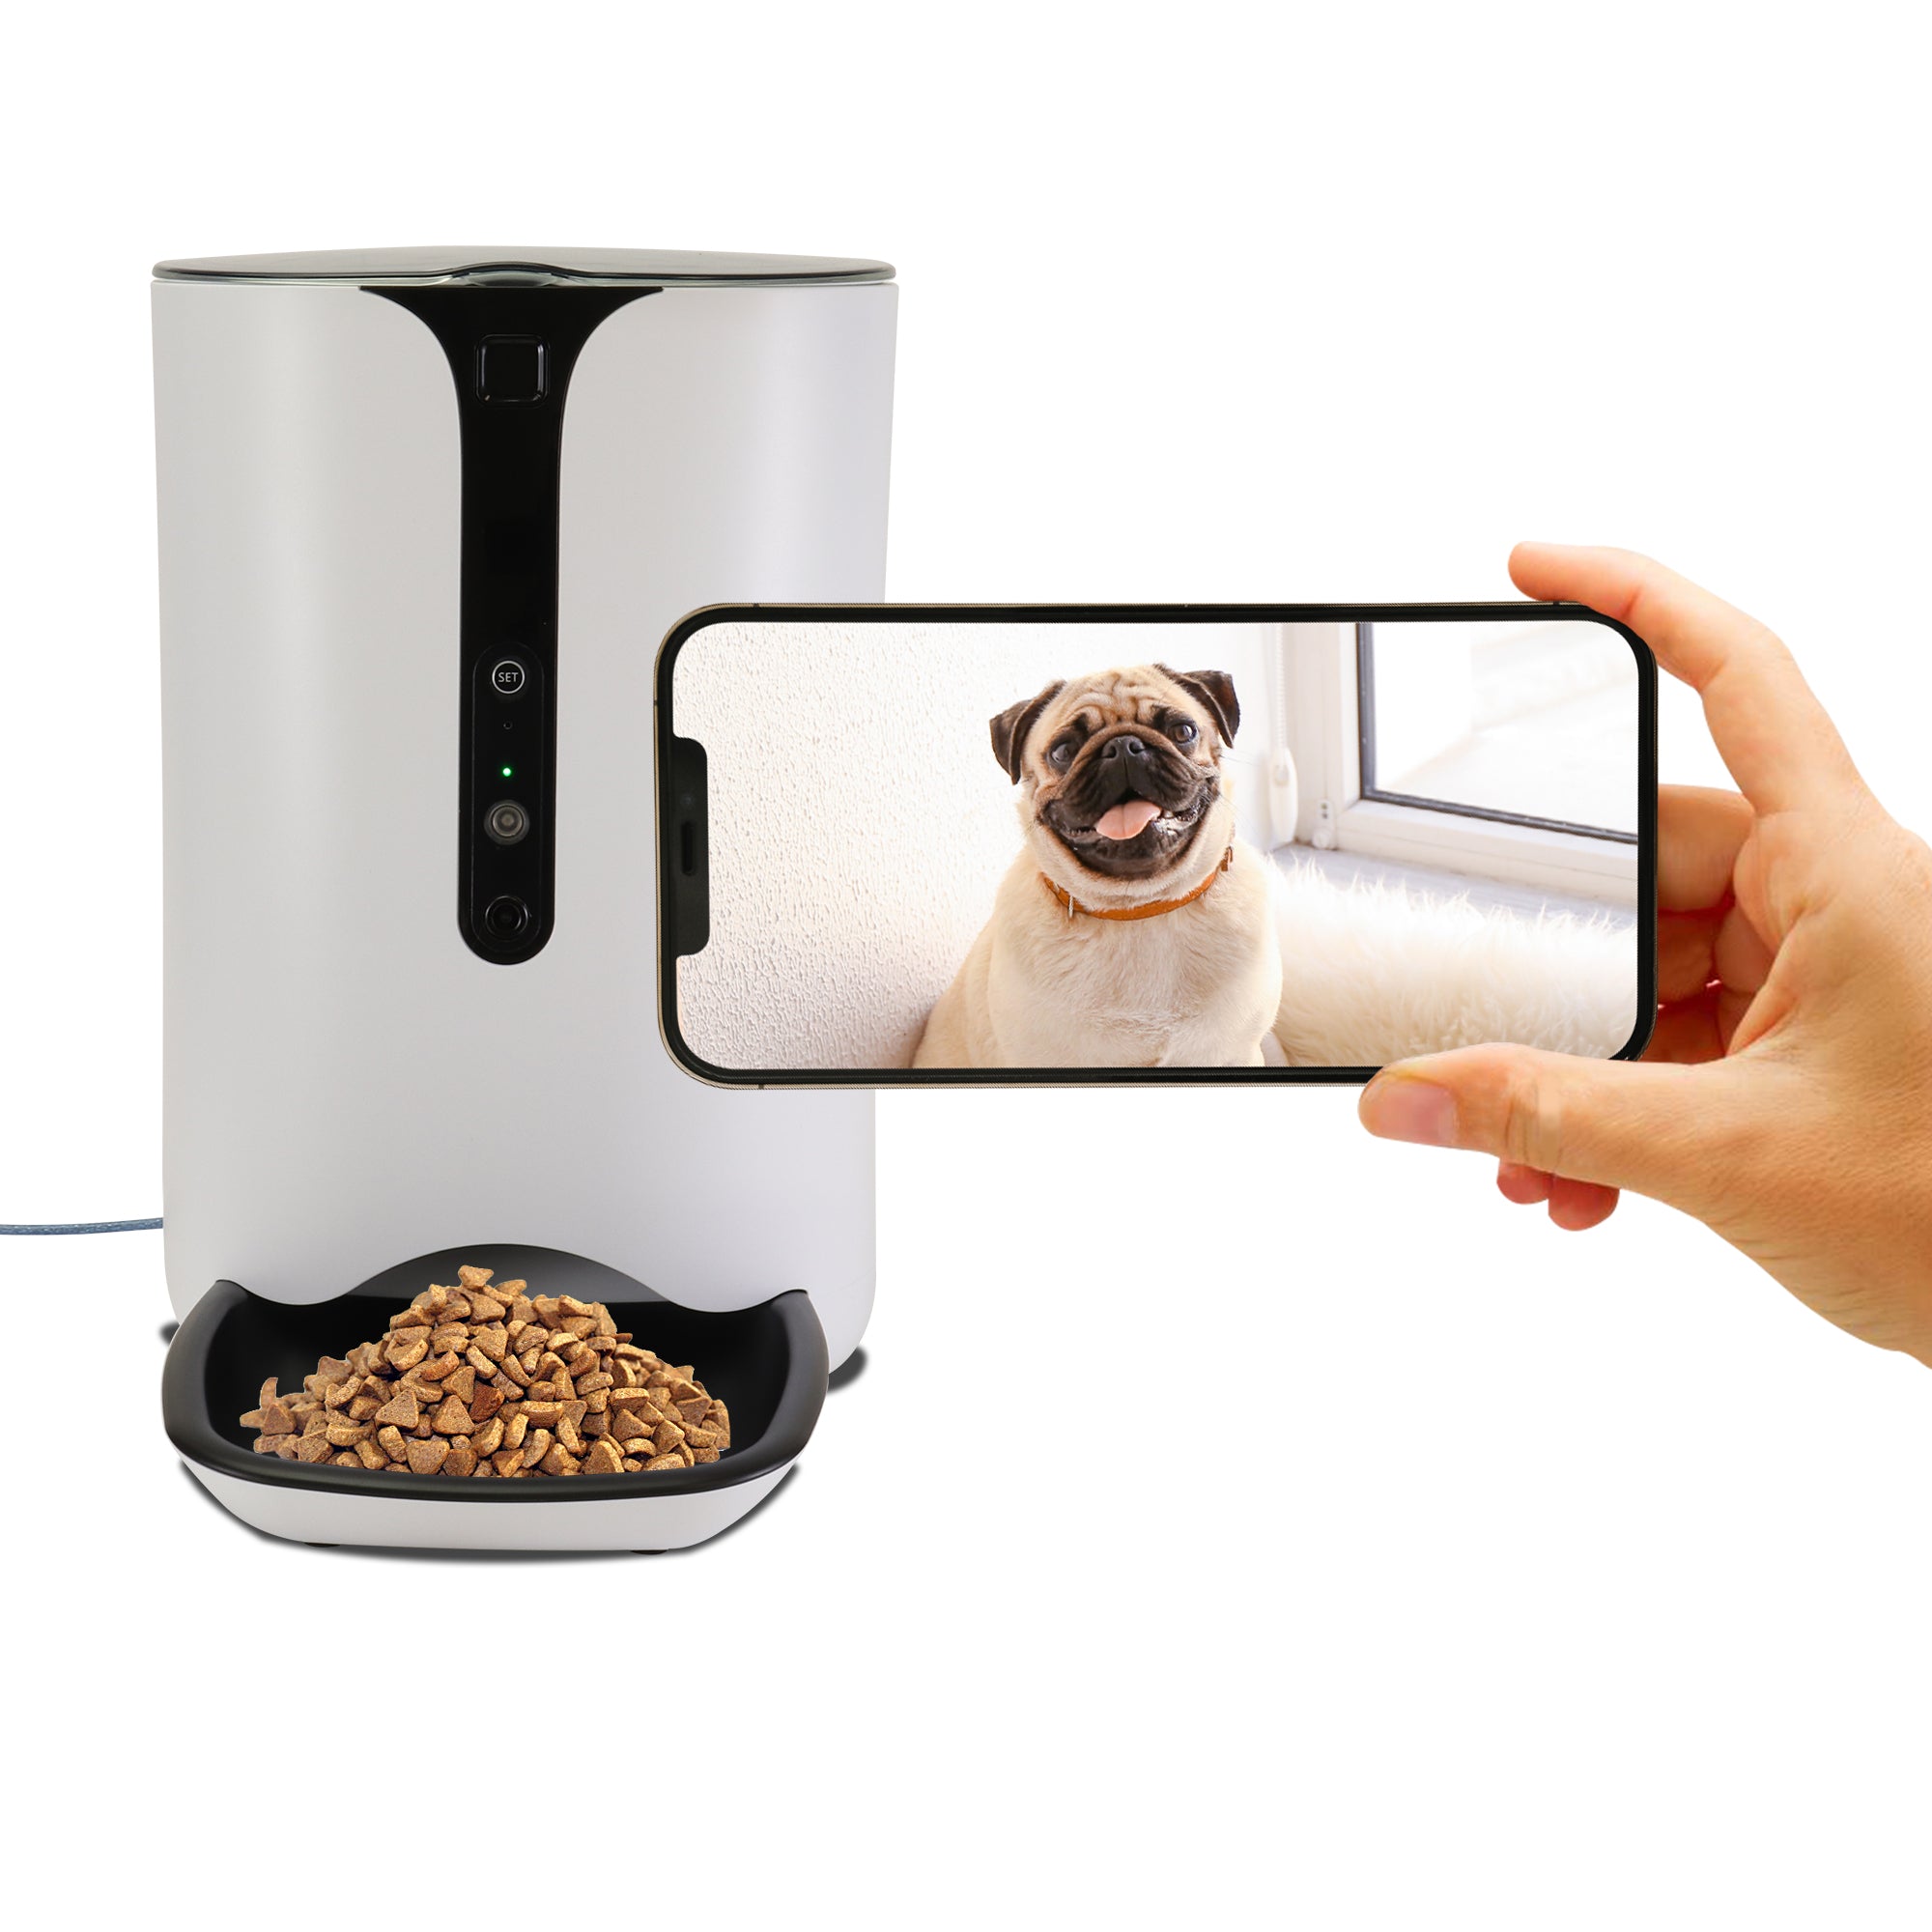 Lentek Automatic food dispenser, with dog food in tray, Mobile display showing image of a pug  